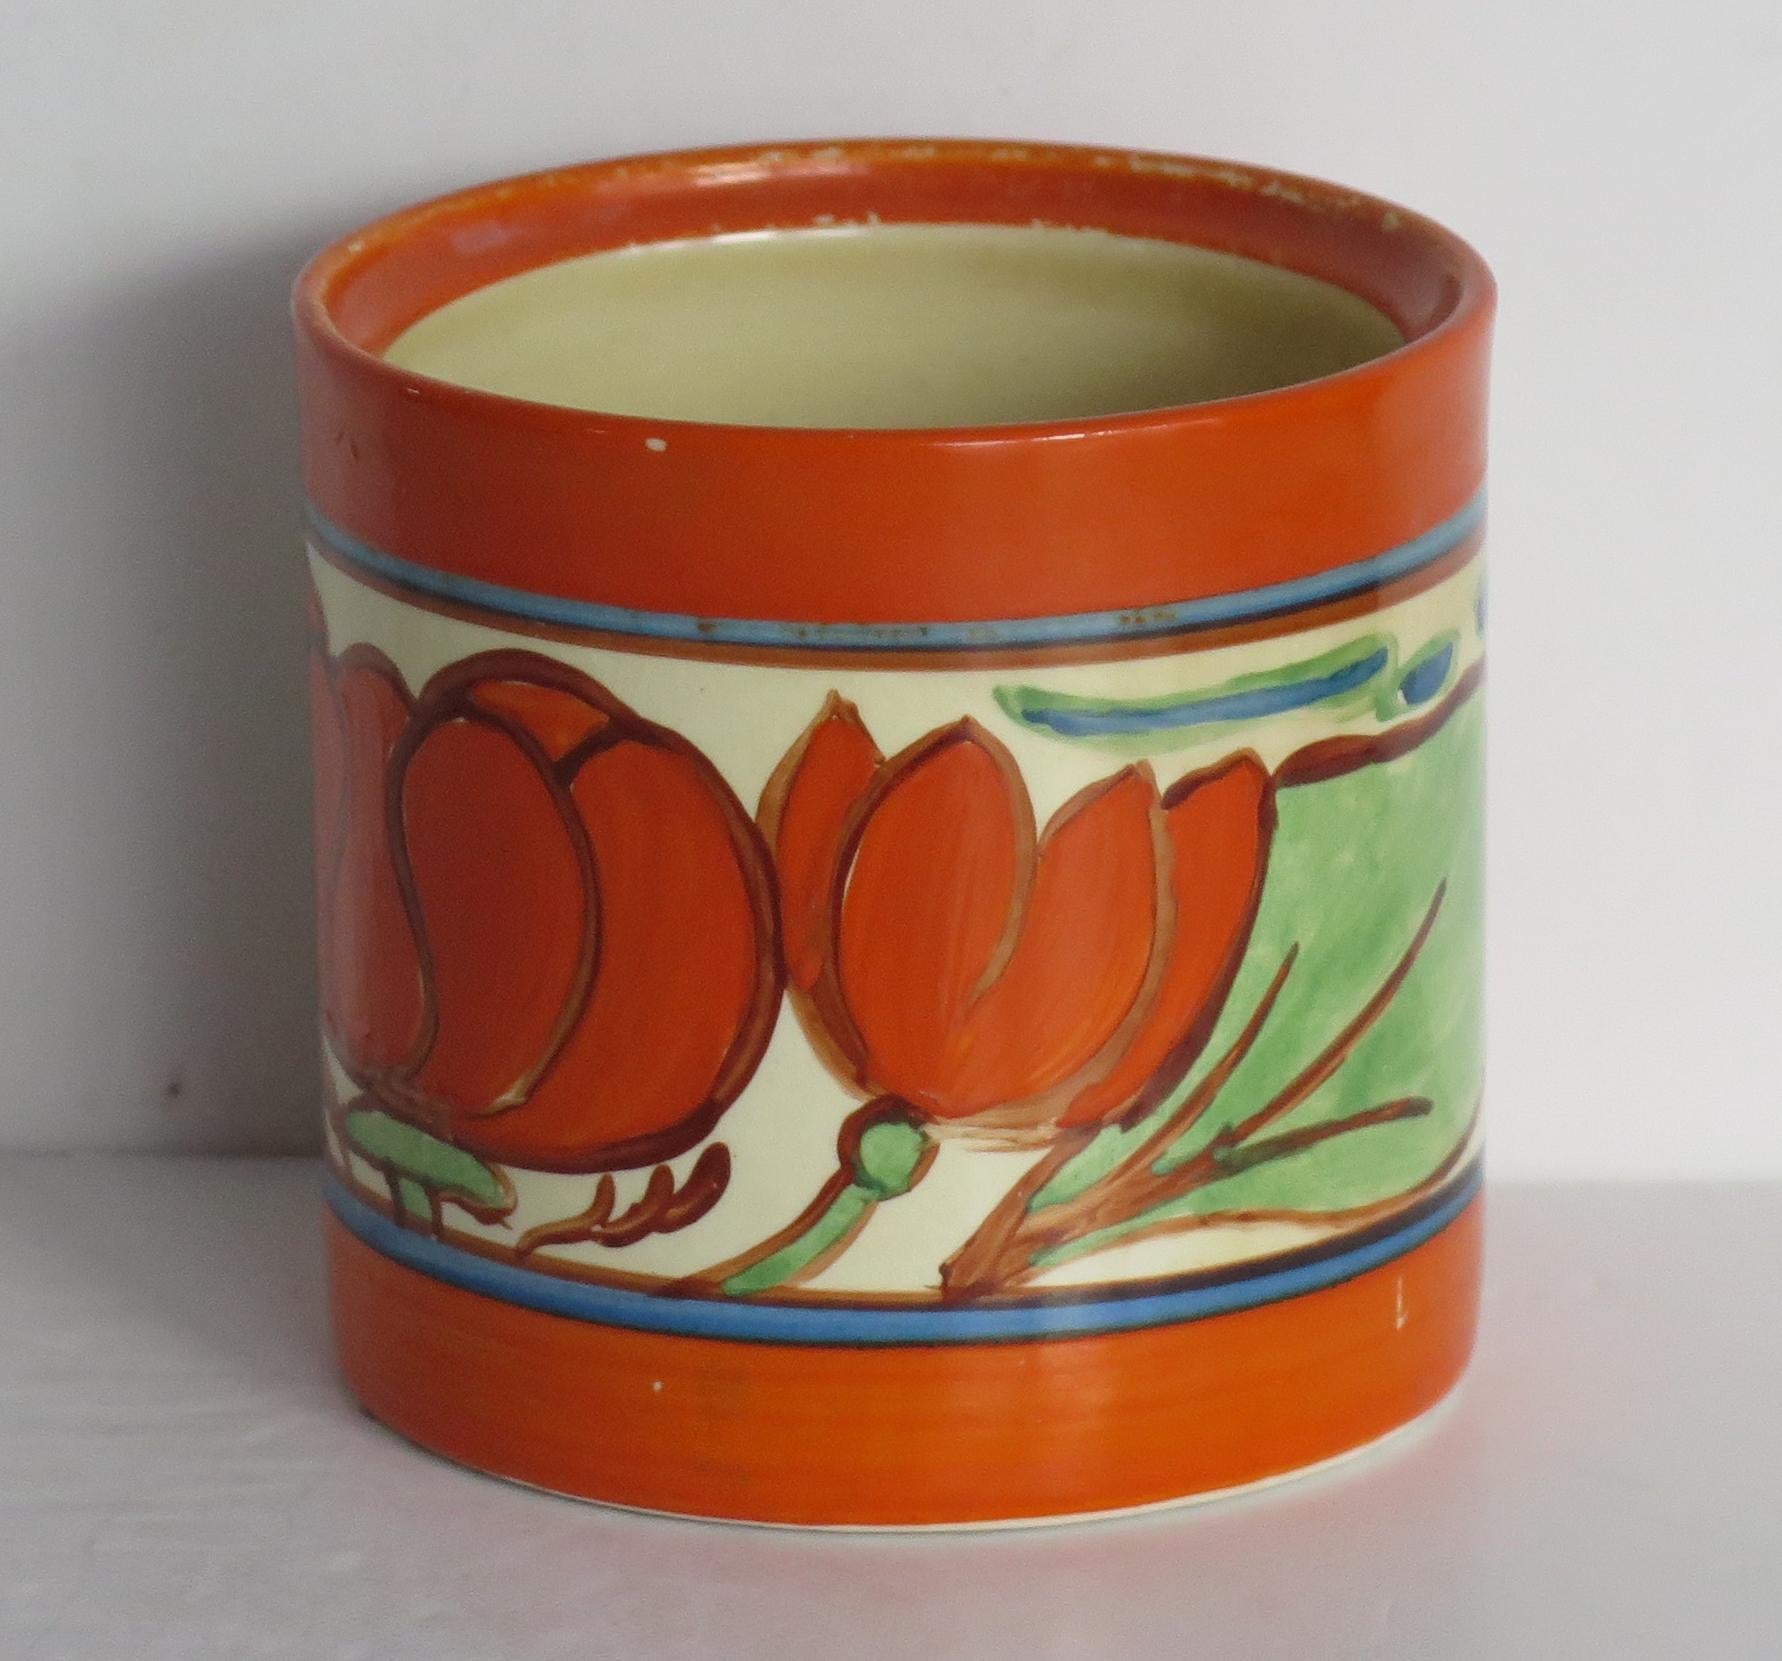 Hand-Painted Clarice Cliff Pot in Lily Orange Fantasque Pattern, Art Deco period circa 1929 For Sale